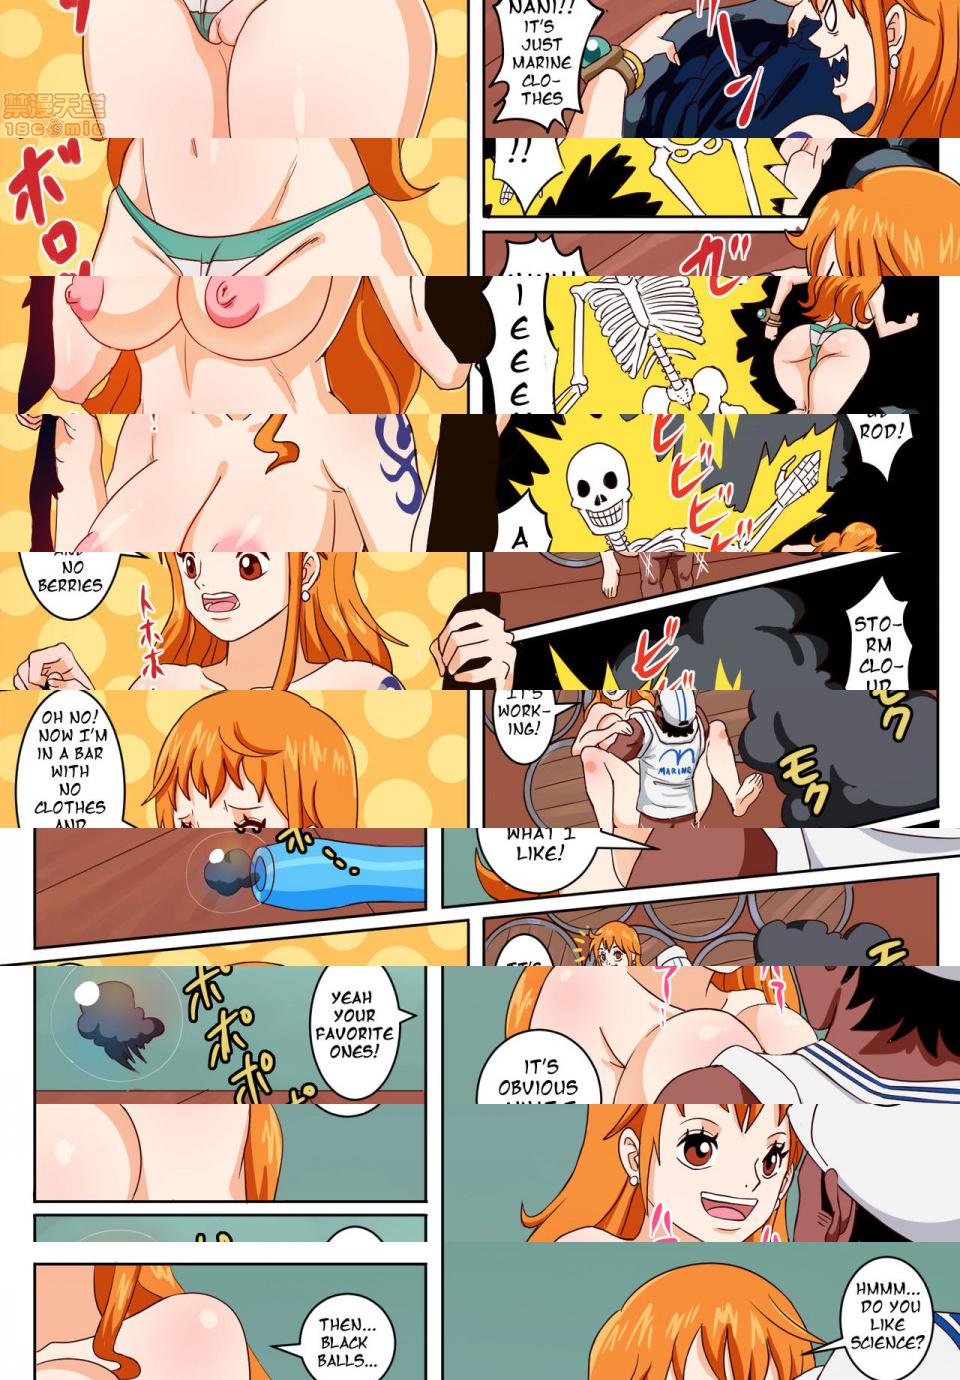 《Pirate Girls At The Bar- Pink Pawg》漫画 Chapter 1